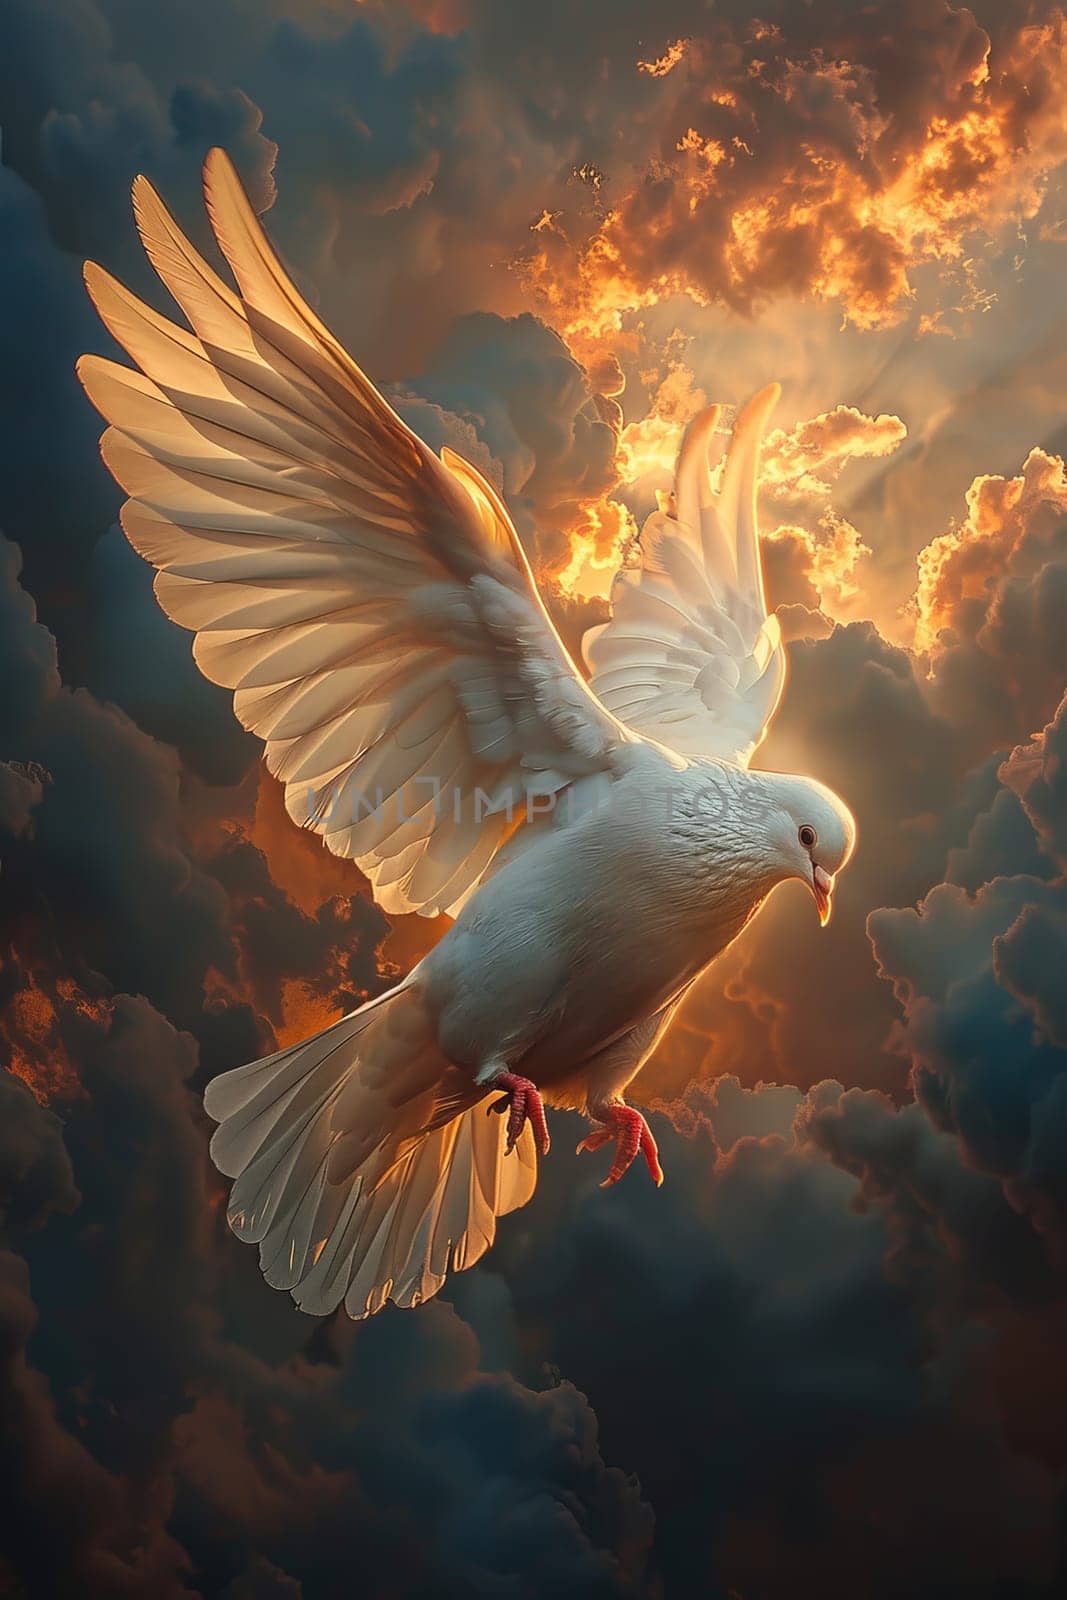 A white dove flying in the sky with a sun shining on it. The image has a peaceful and serene mood, as the dove is soaring high above the clouds